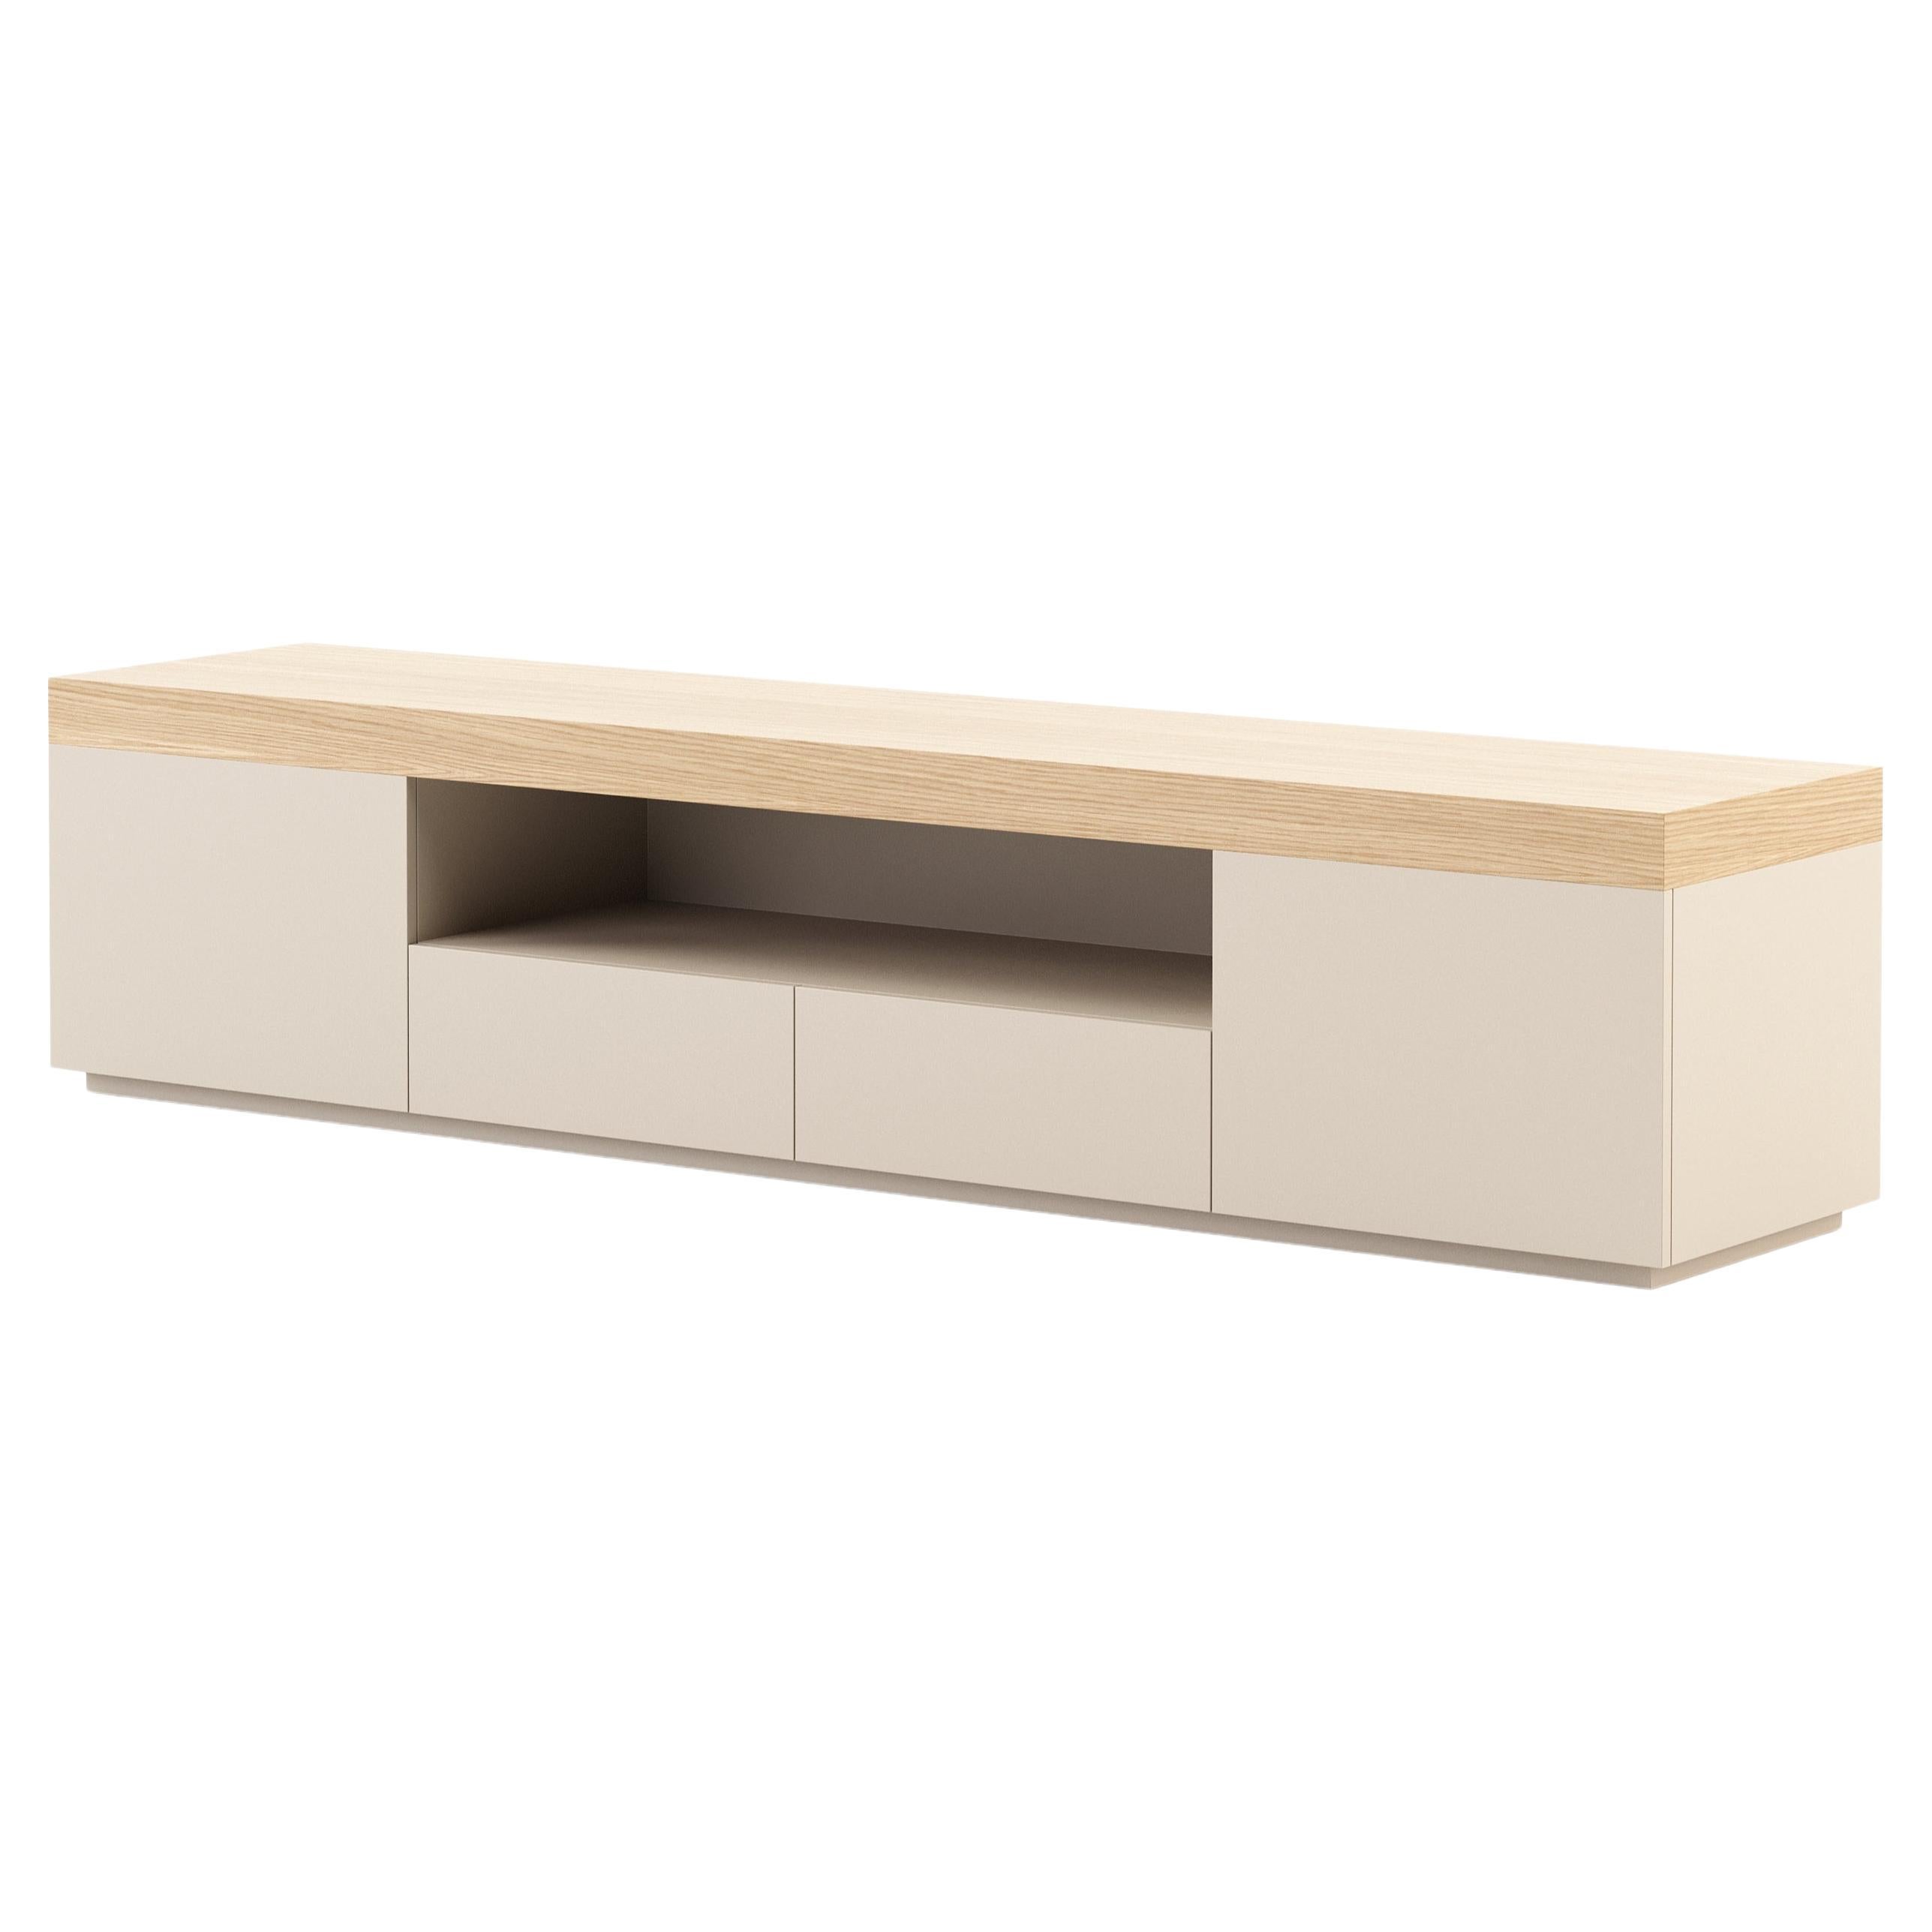 Modern Cascais Tv Cabinet made with Oak and lacquer, Handmade by Stylish Club